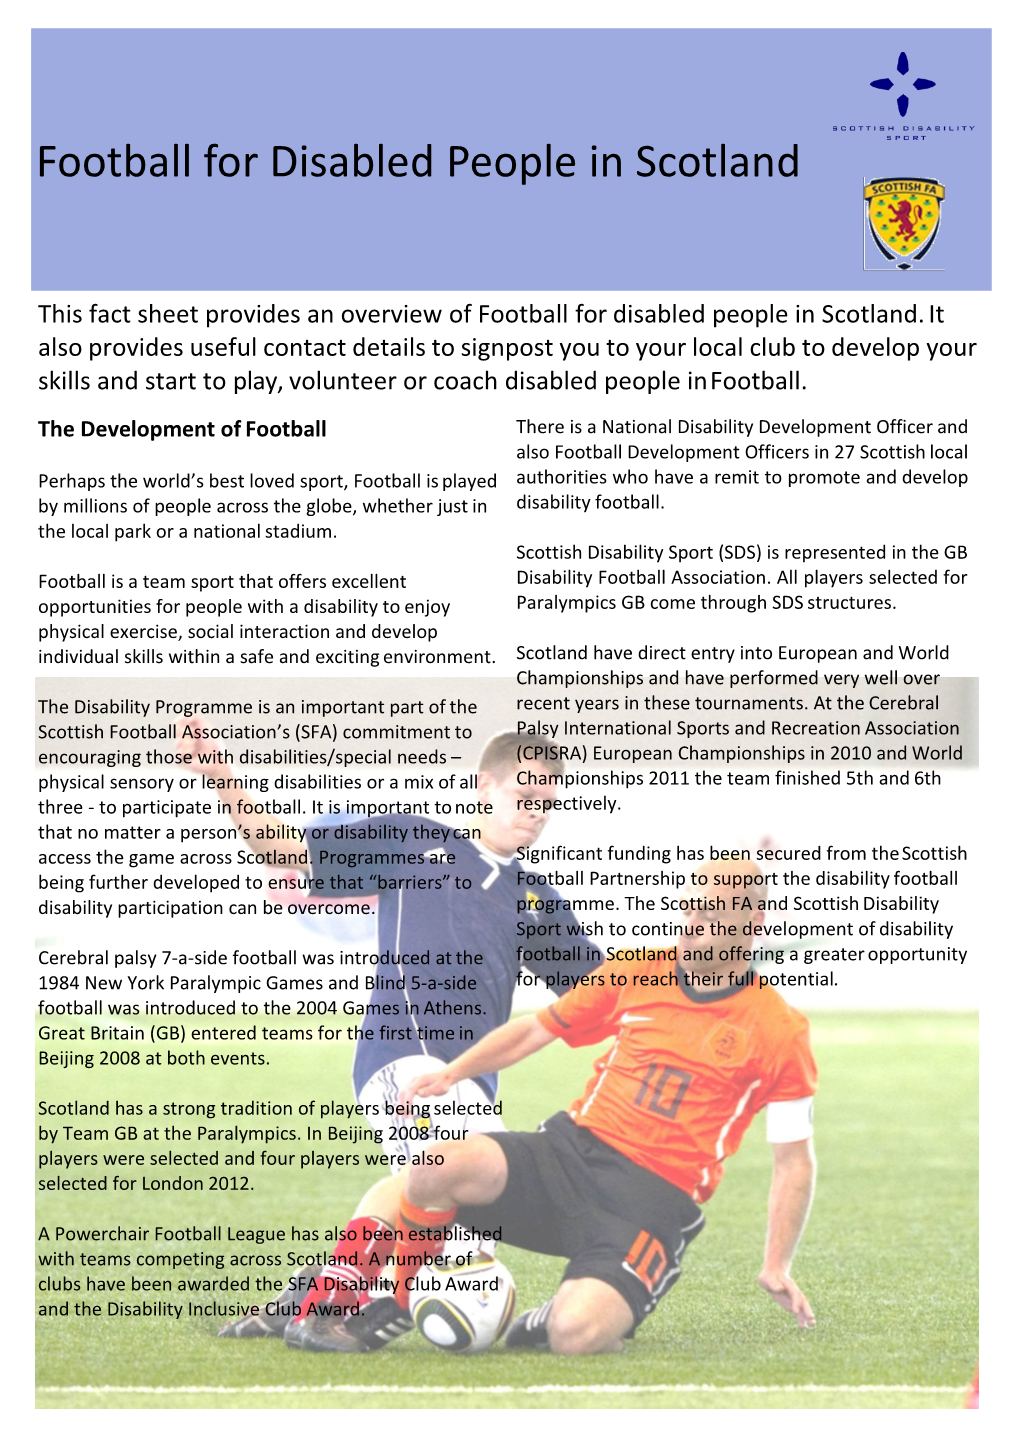 Football for Disabled People in Scotland